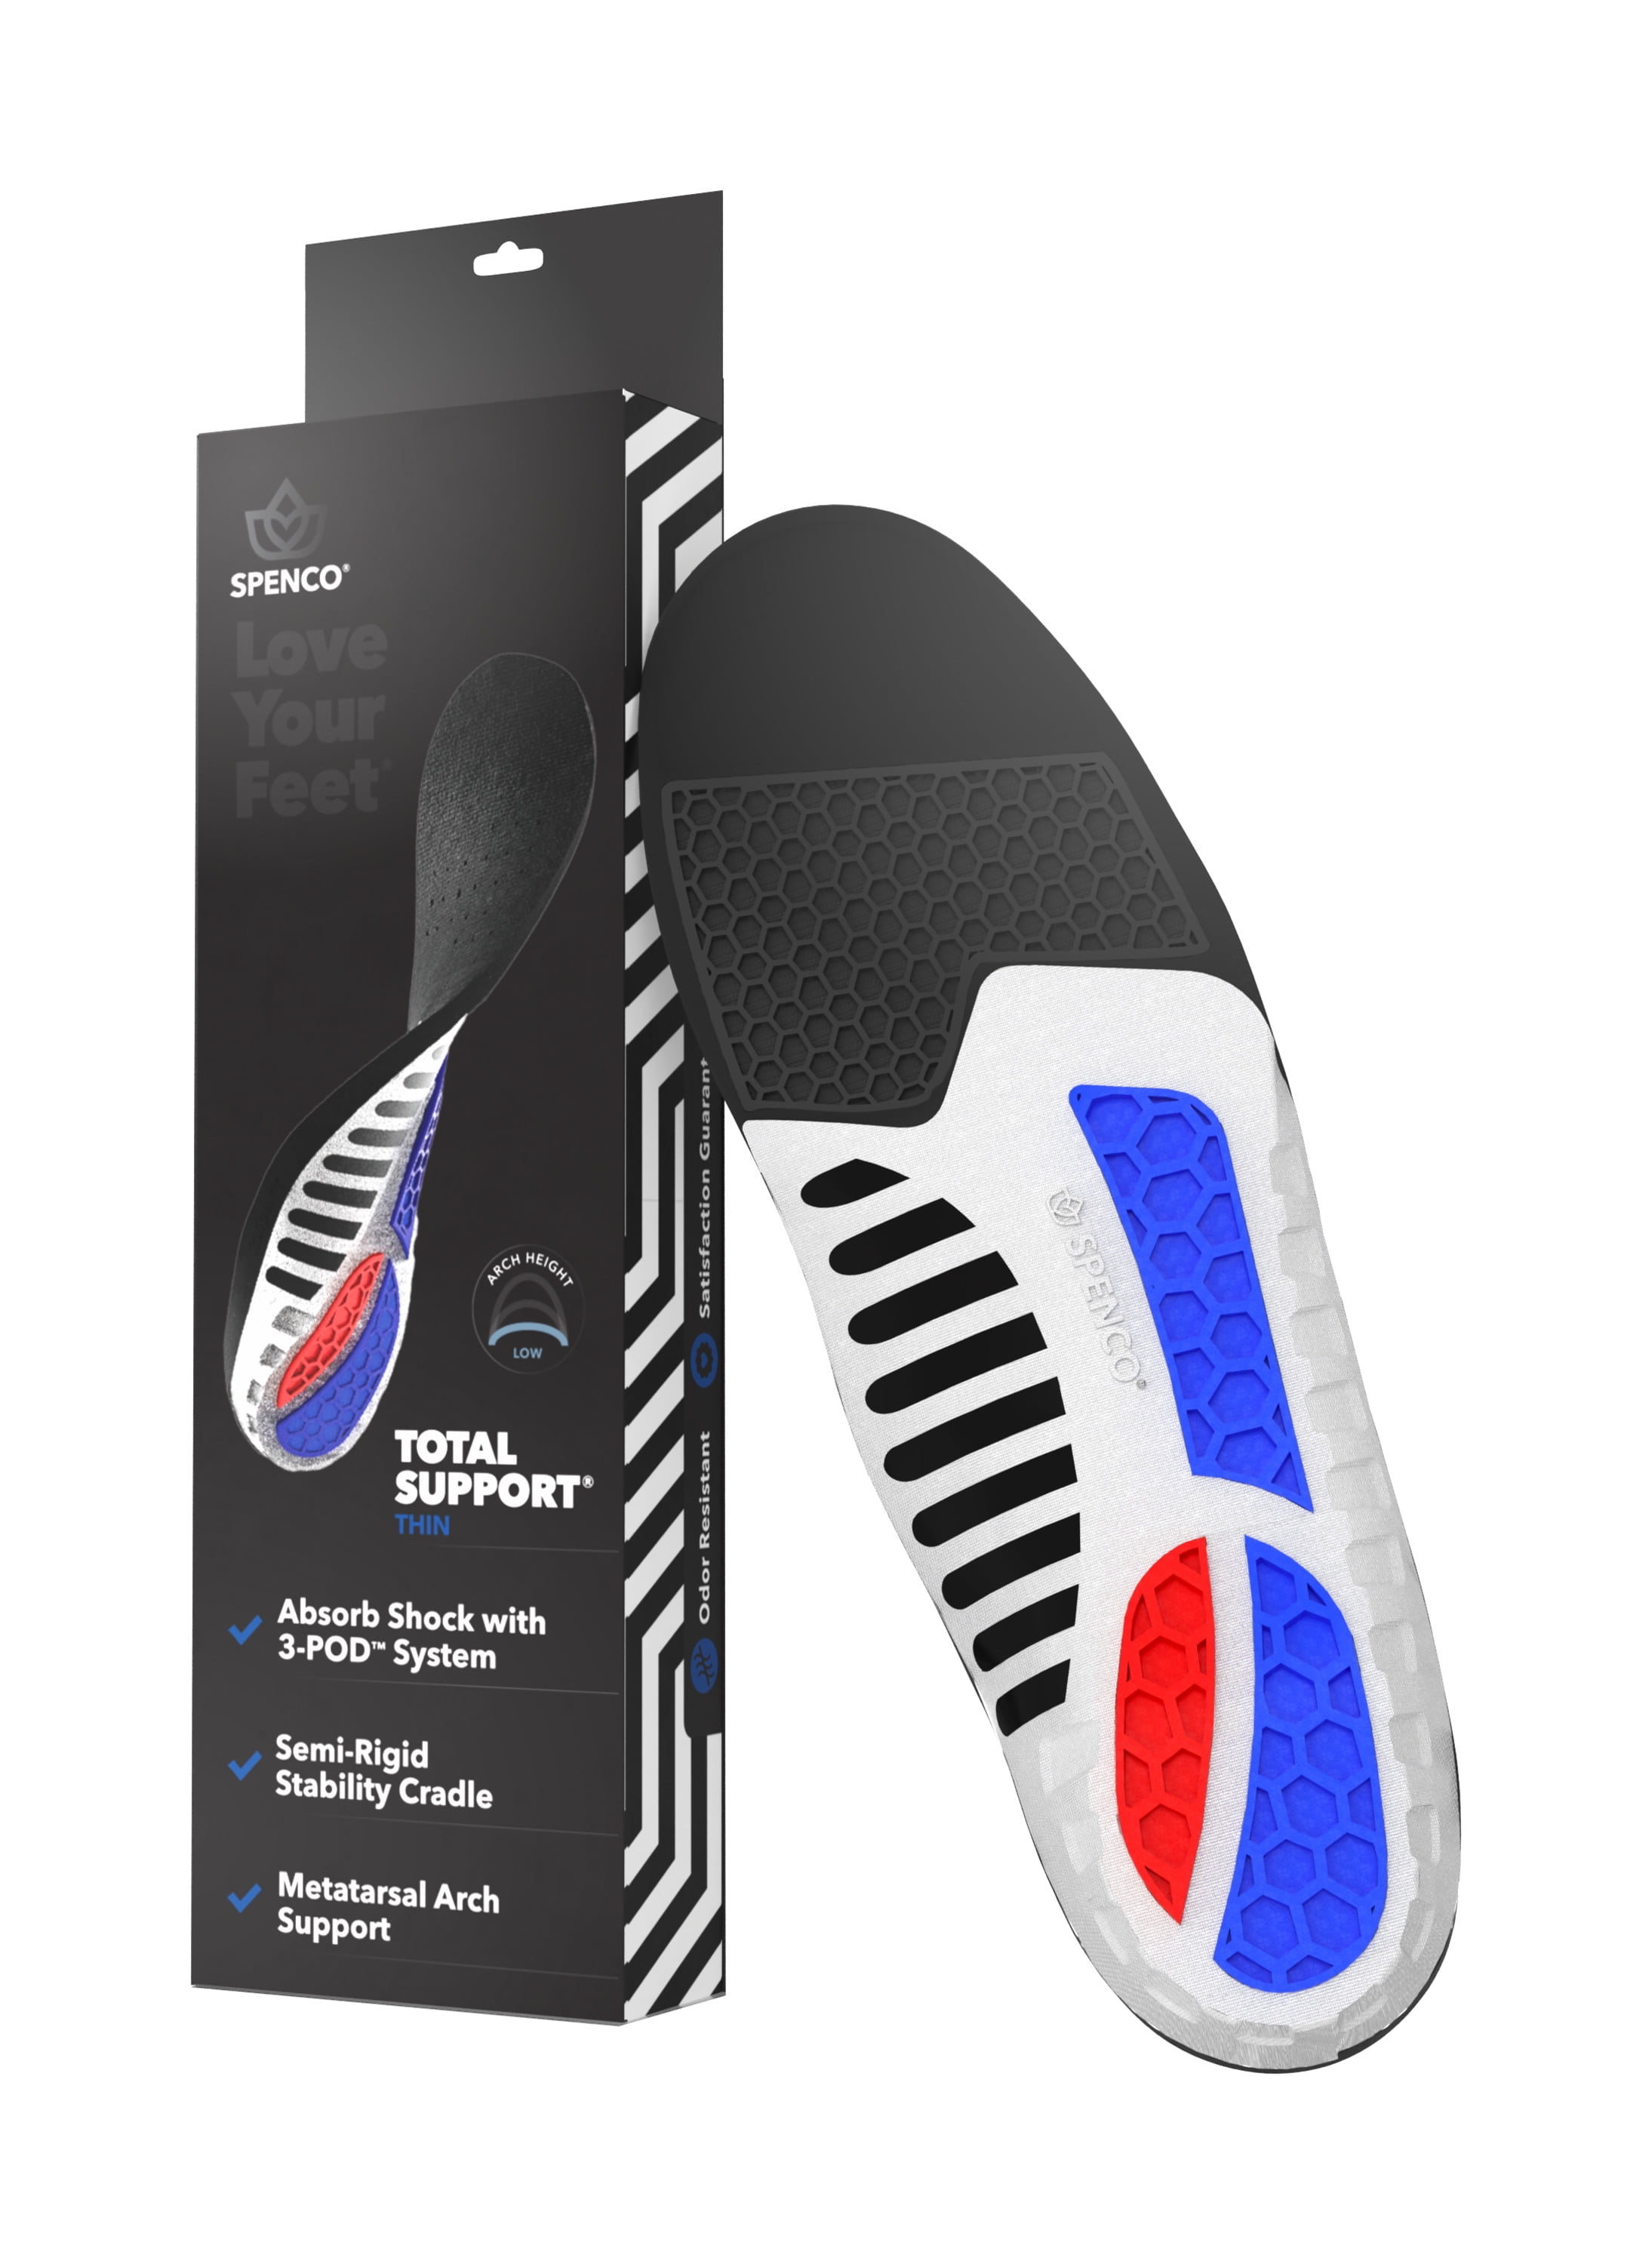 Spenco Total Support Air Grid Insole sizes 2,3,4,5 